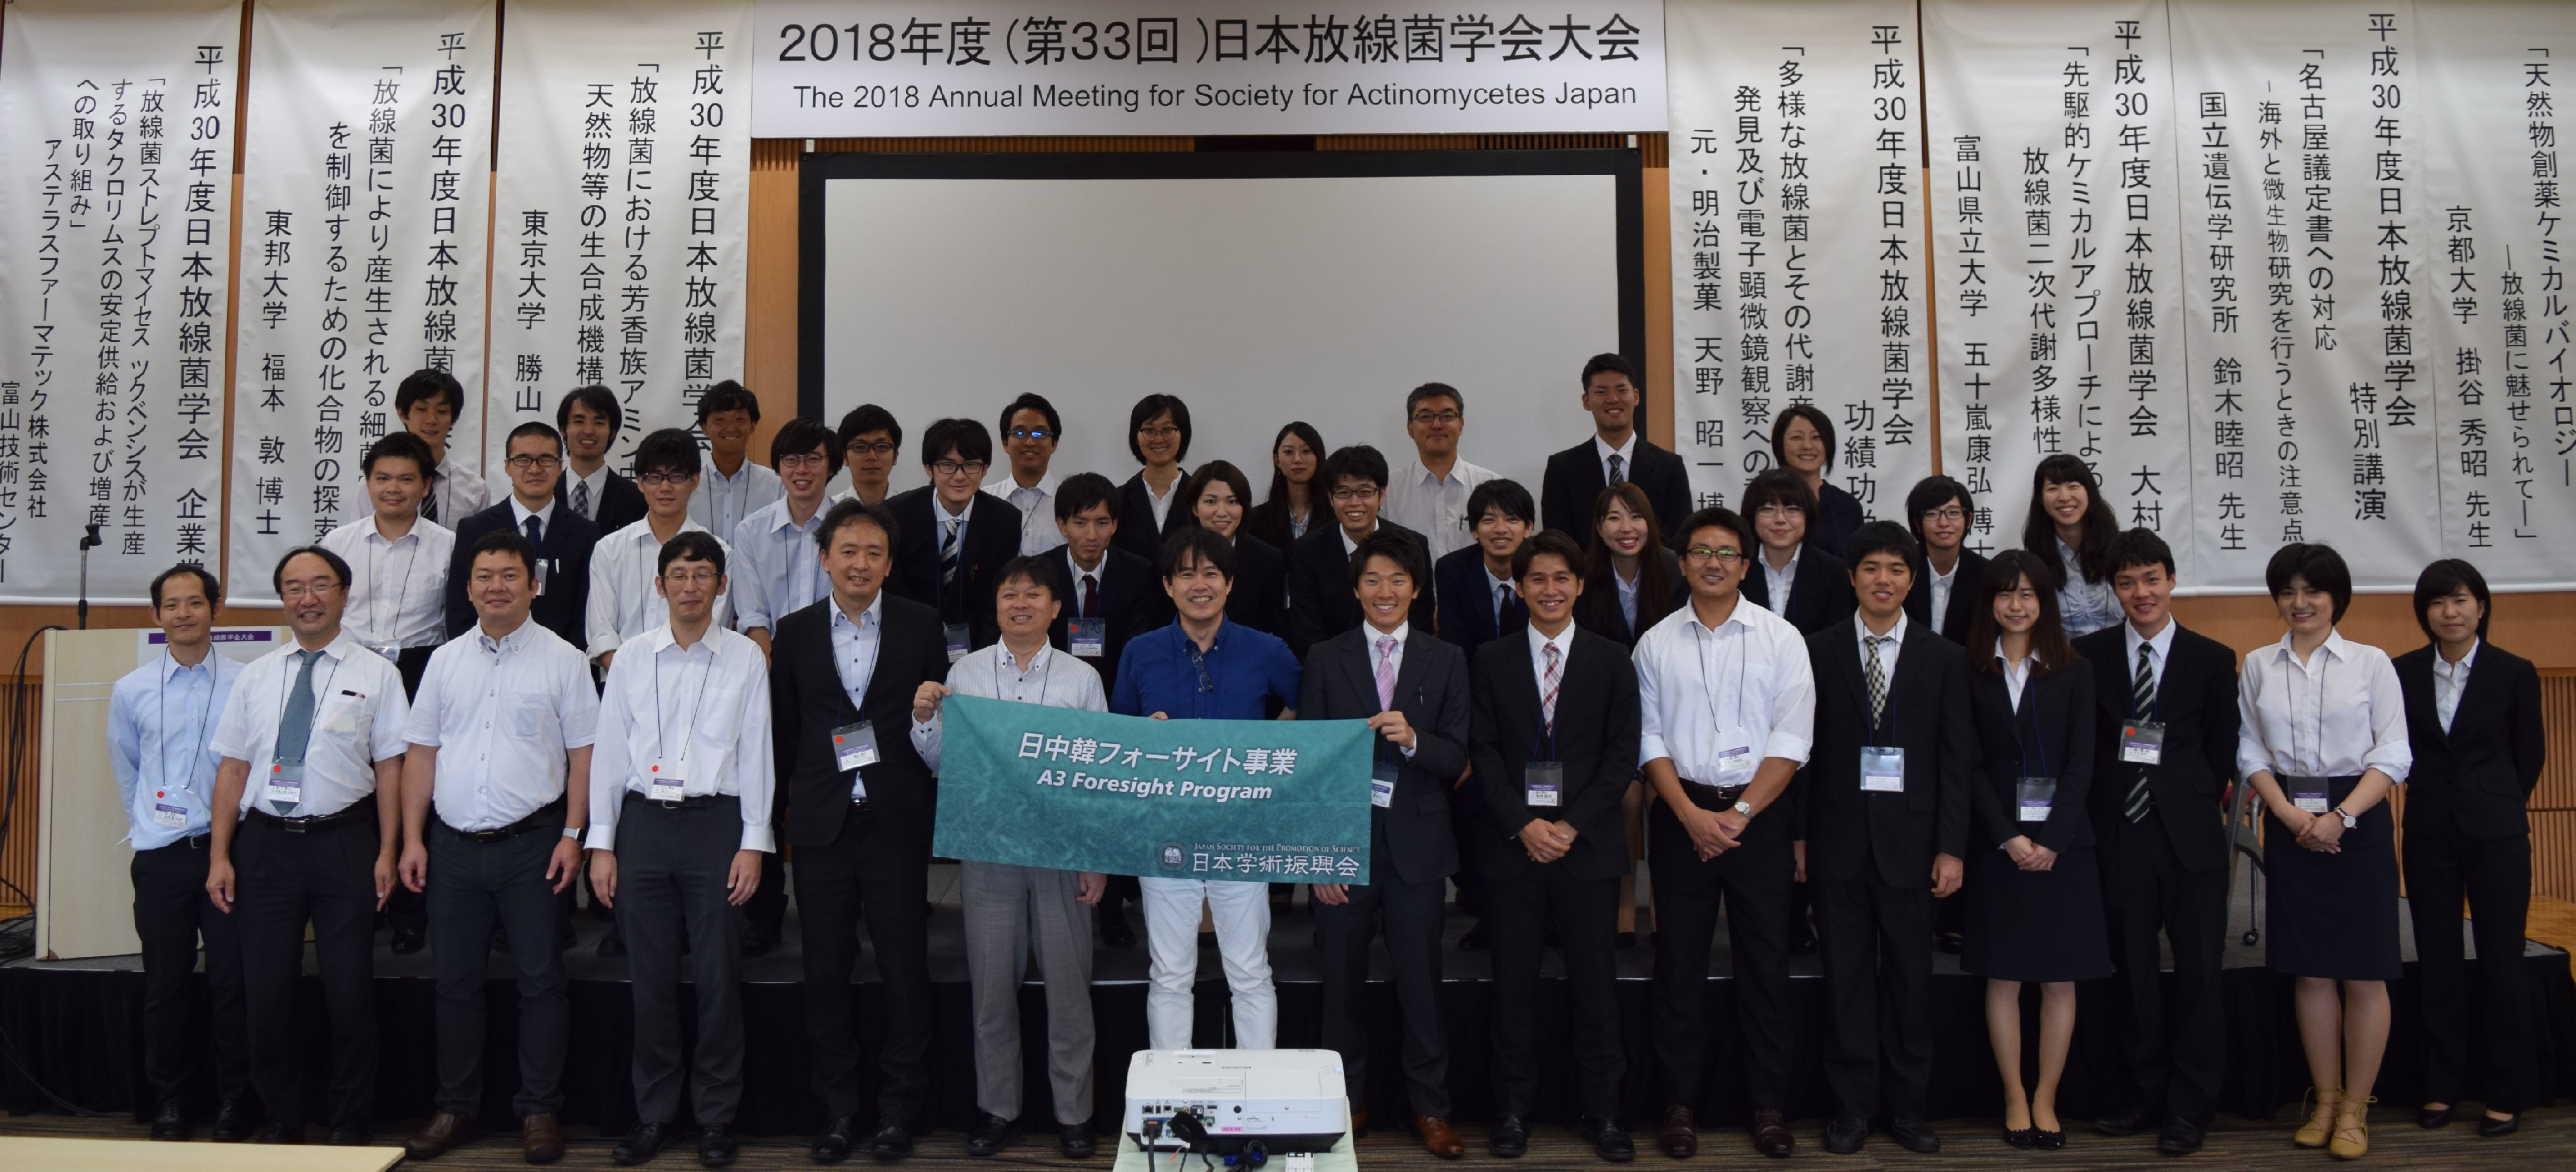 Domestic meeting in the Society for Actinomycetes Japan annual meeting, Tokyo, Japan